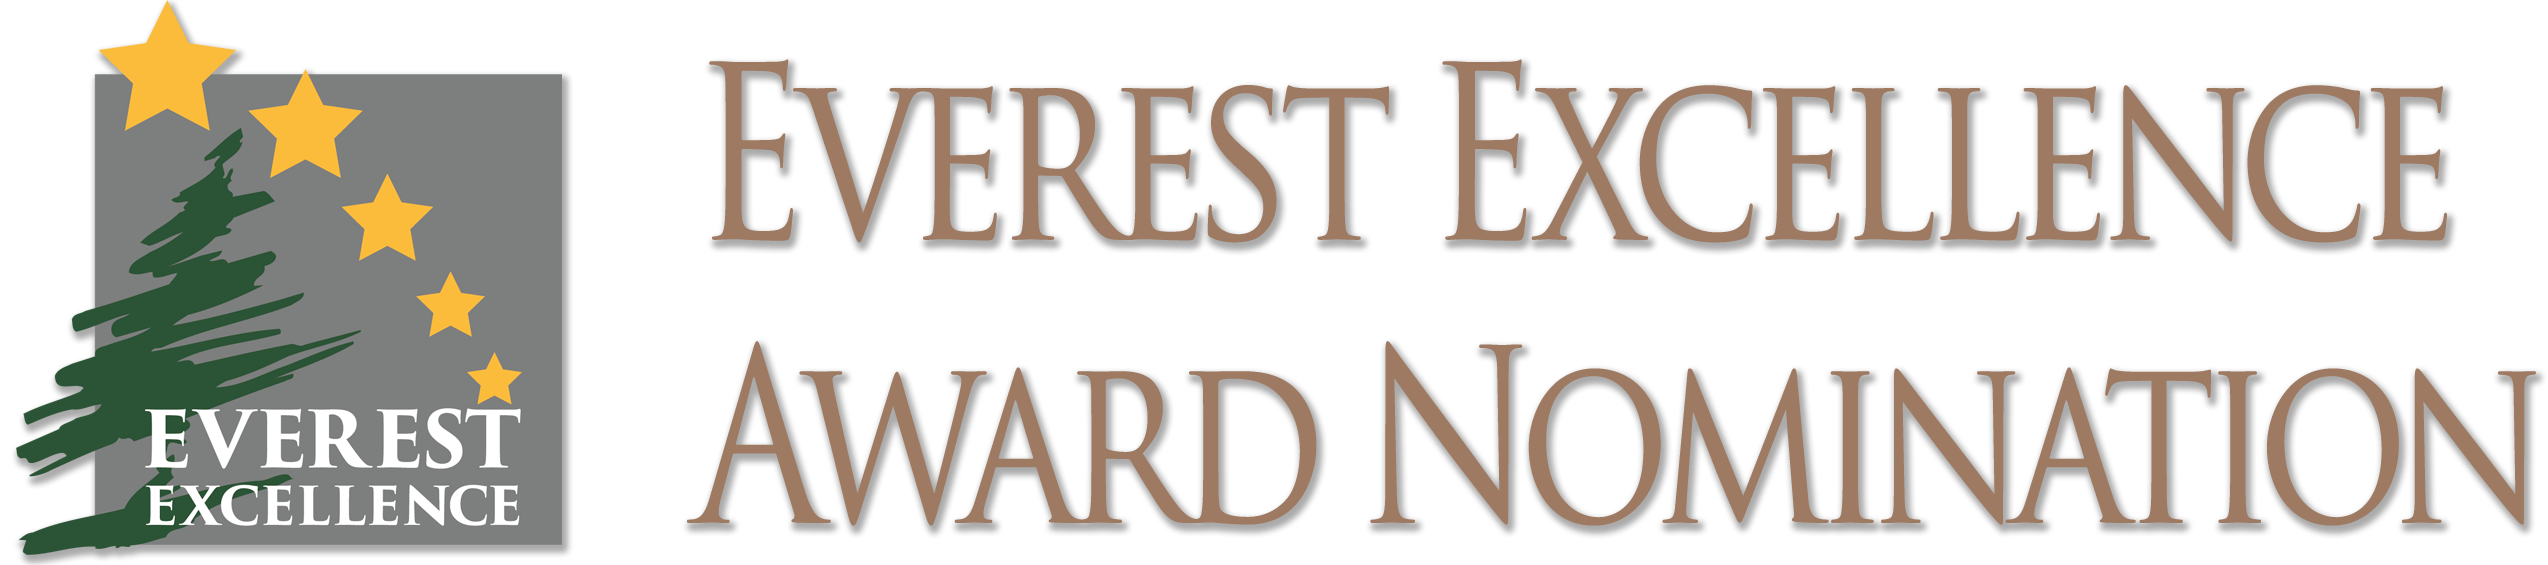 Everest Excellence Award Nominations